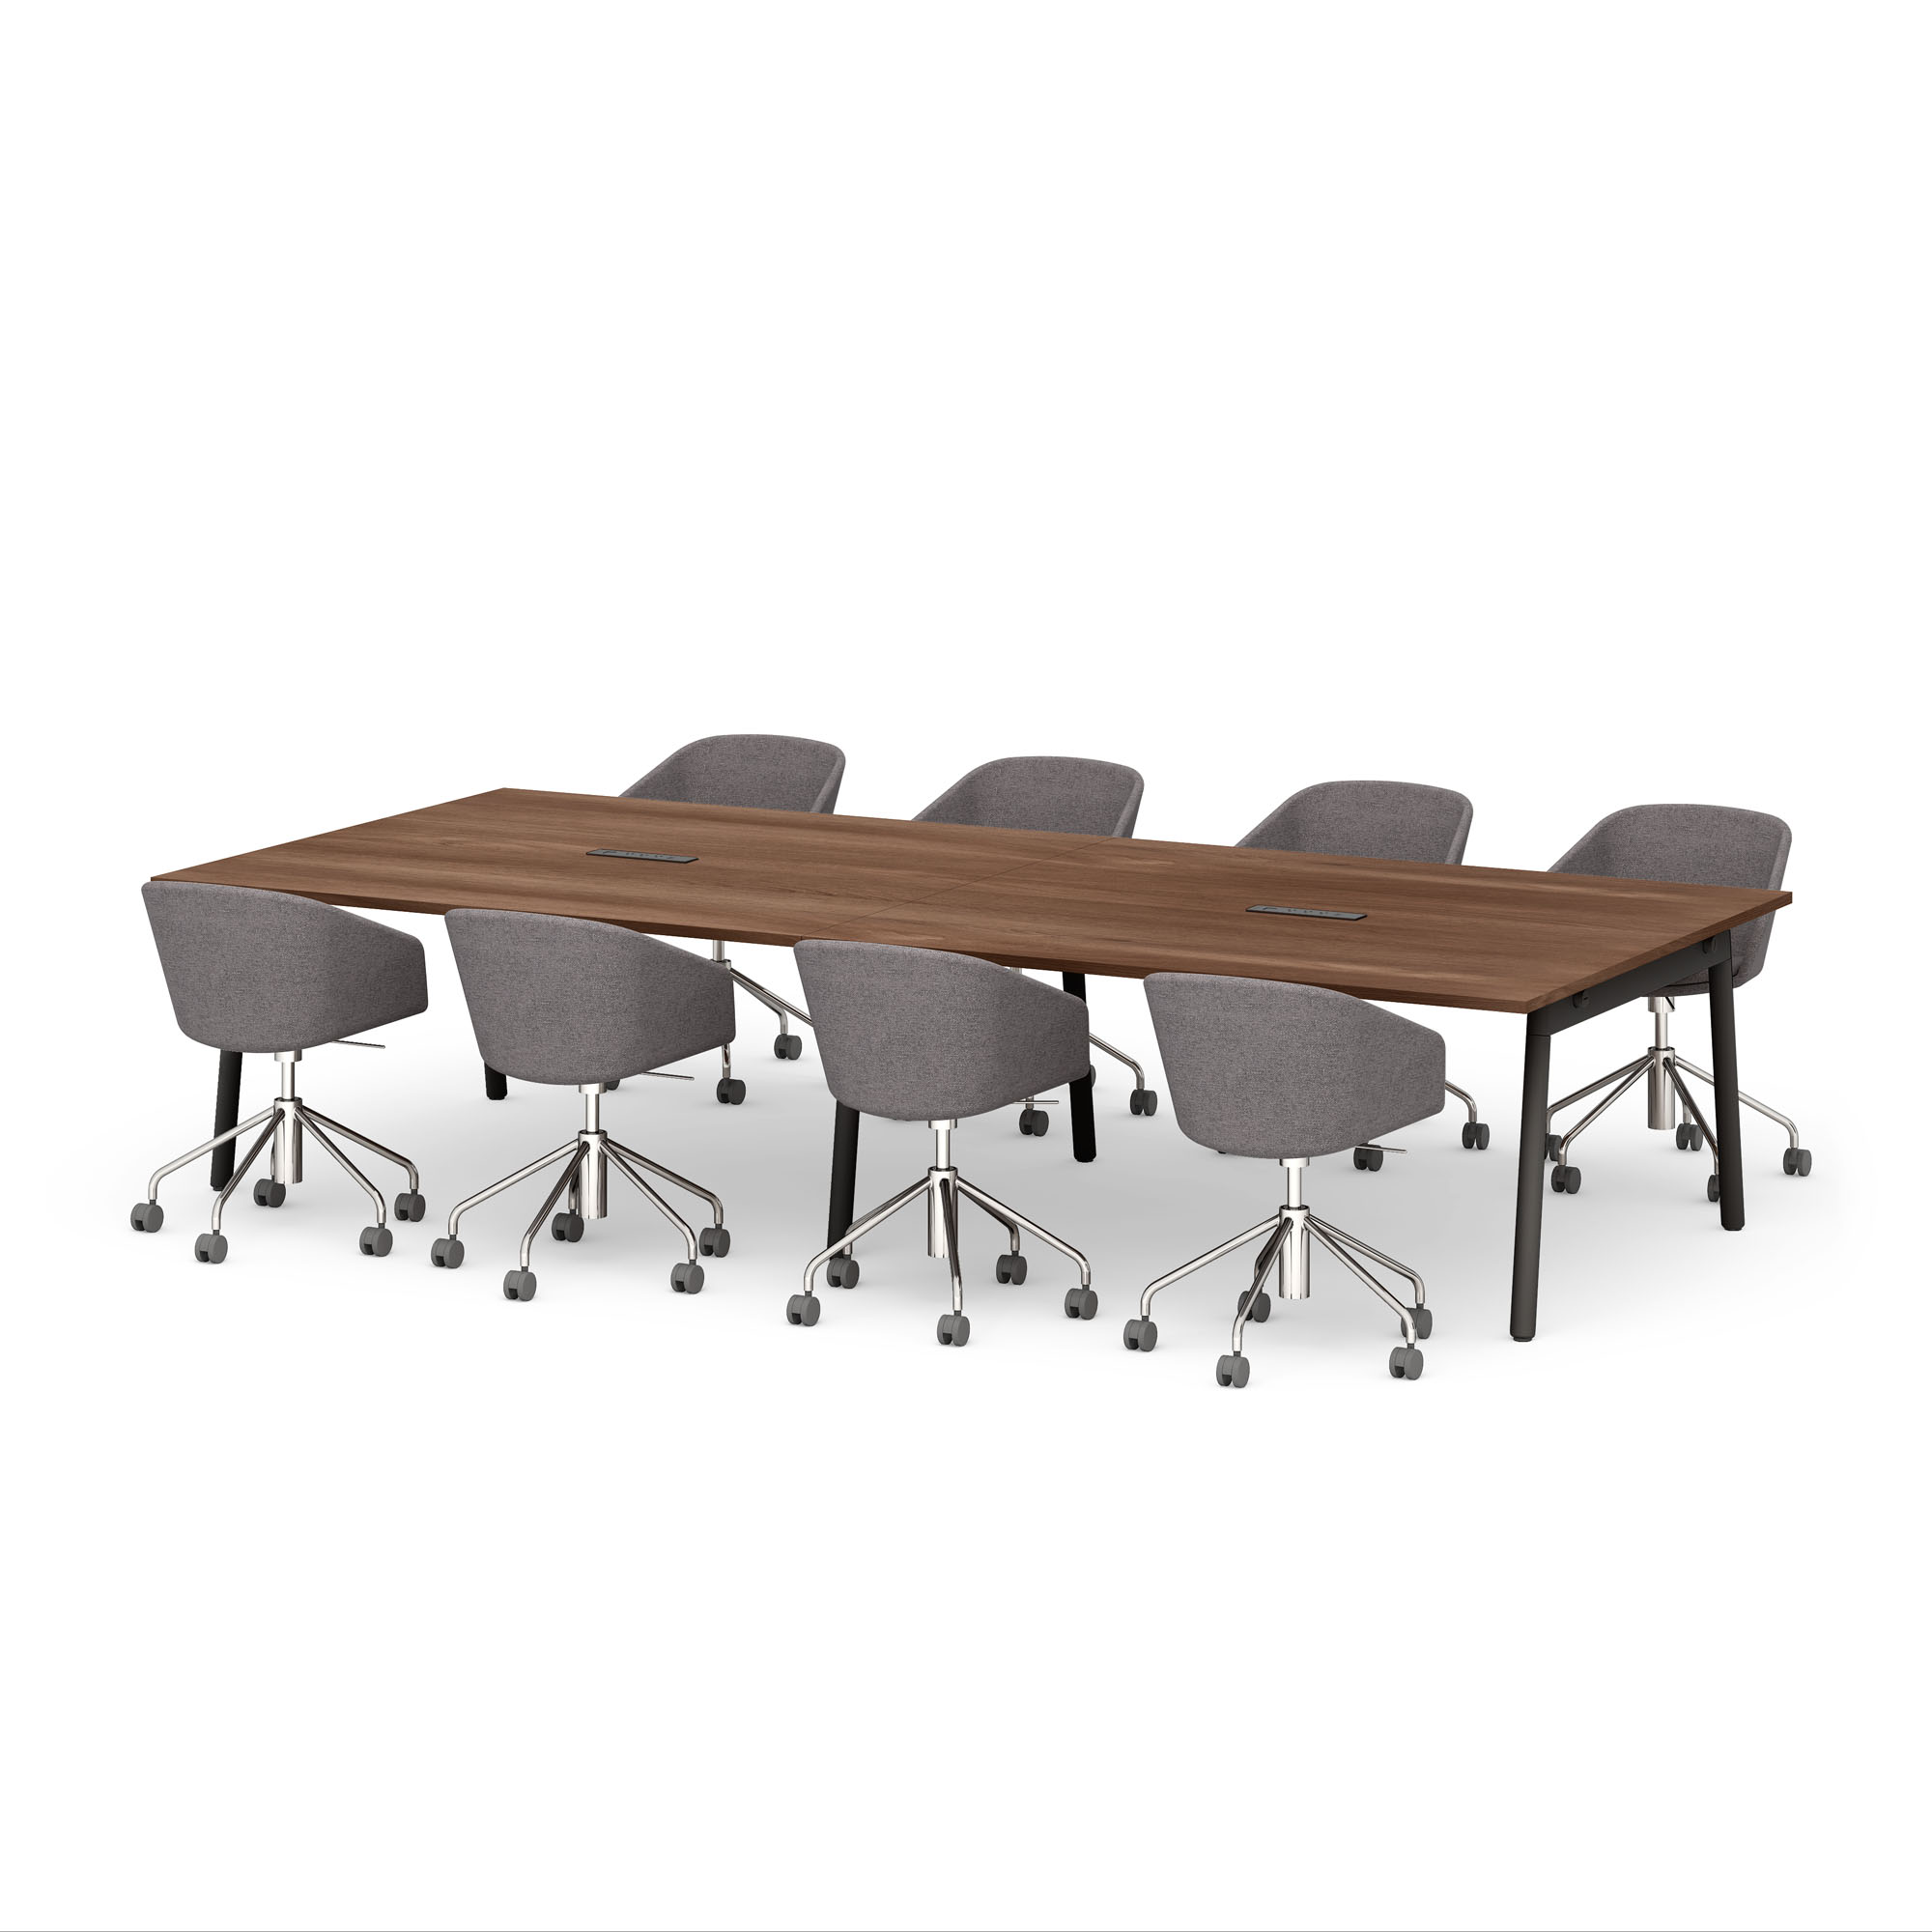 Series A Scale Rectangular Conference Table, Walnut, 132x60", Charcoal Legs,Walnut,hi-res